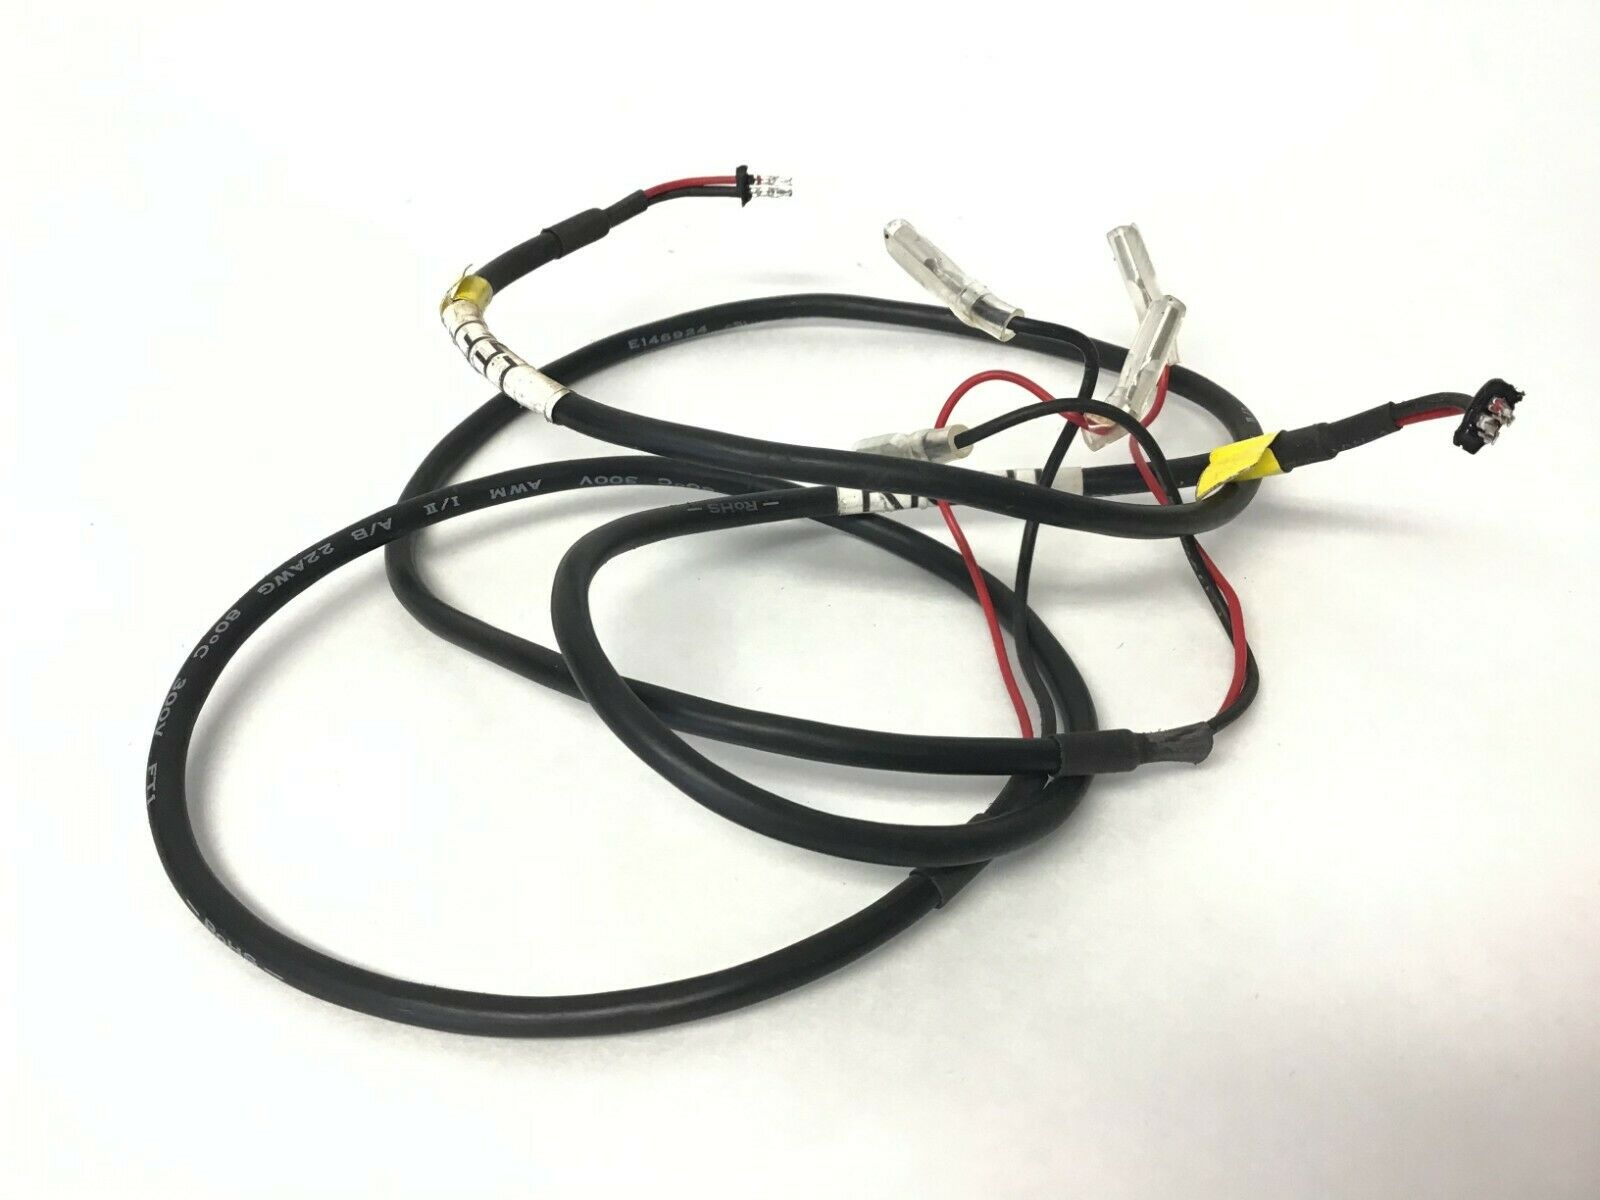 True Fitness TL1000 Traverse Lateral Trainer Hand Sensor Cable Assembly 22AWG (Used)